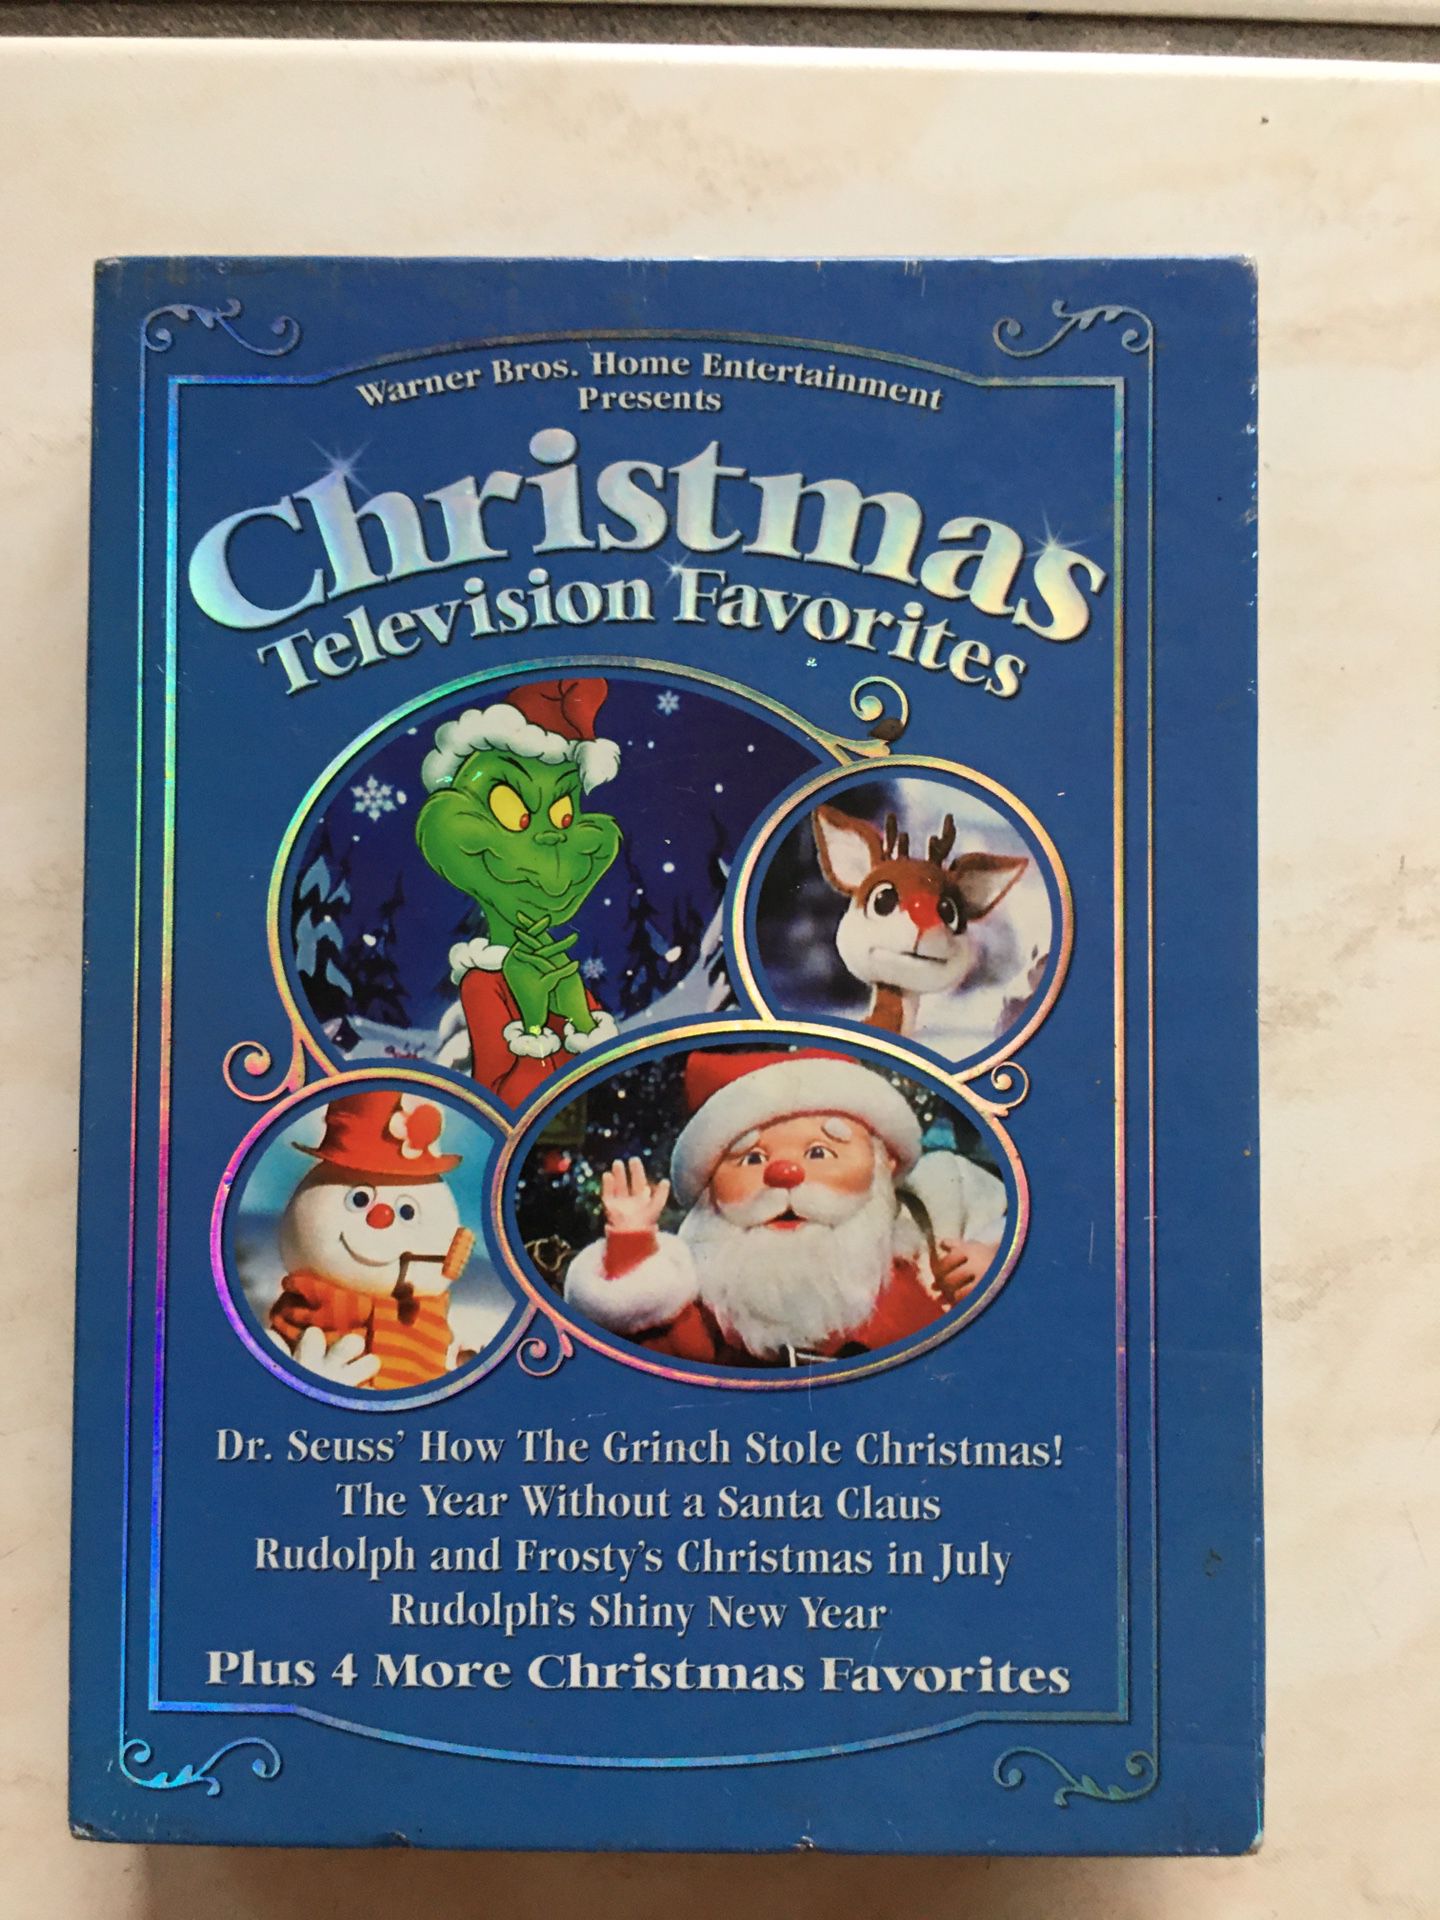 Warner Brothers Home Entertainment, Christmas Television Favorites DVD Collection